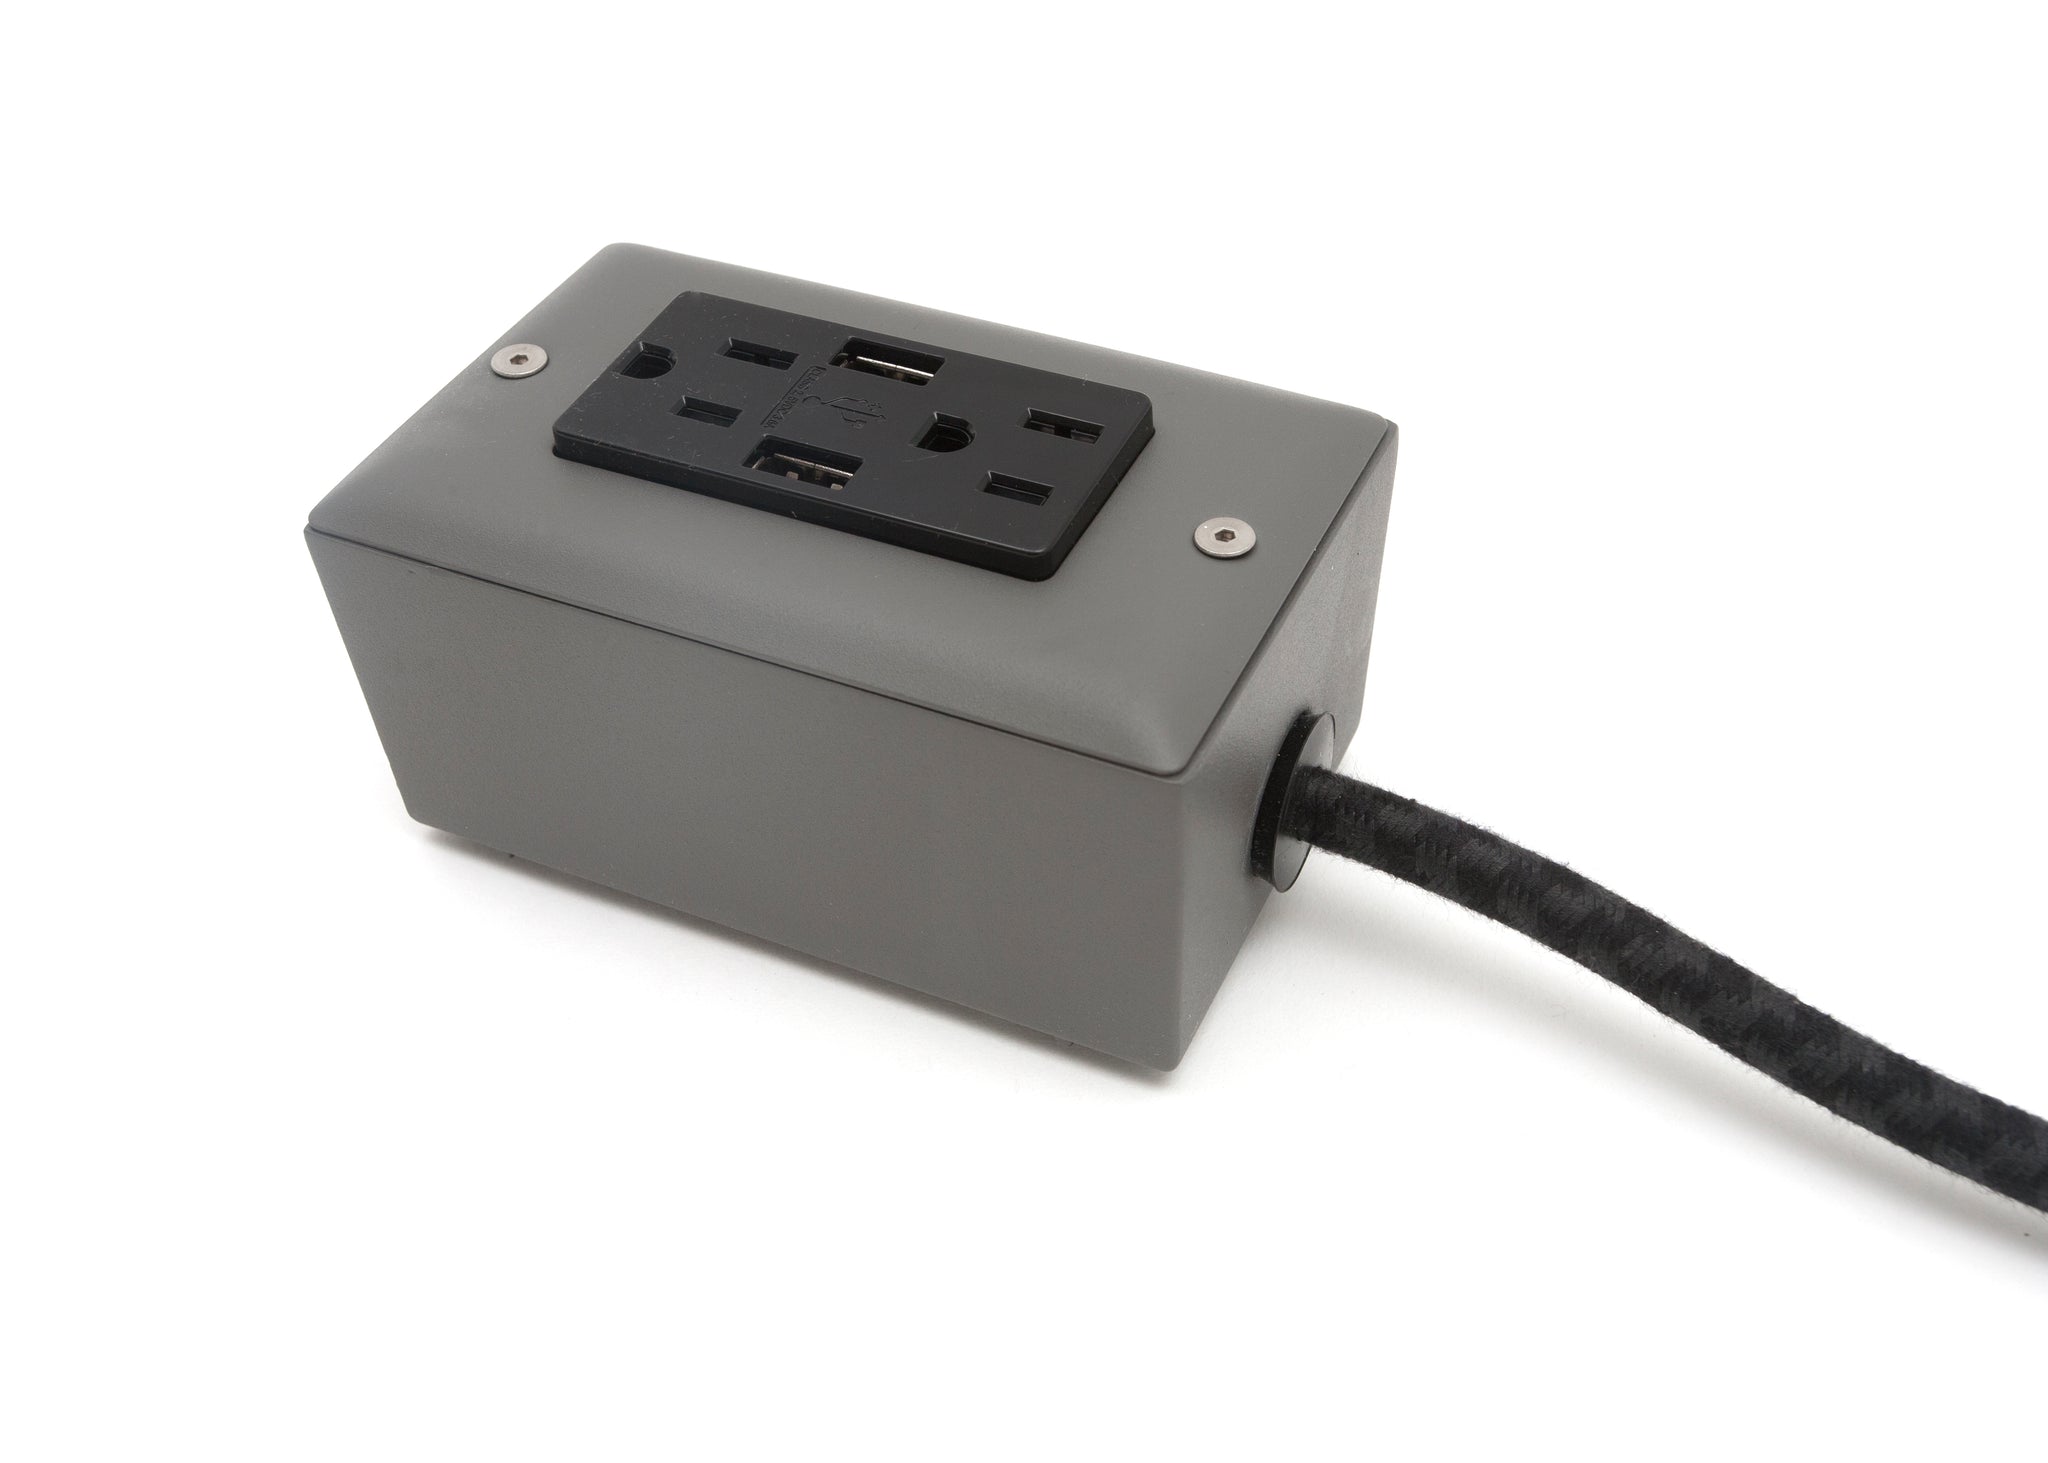 The First Smart Chip Extension Cord - 12' Extō Dual-USB, Dual-Outlet - Humboldt Fog Grey